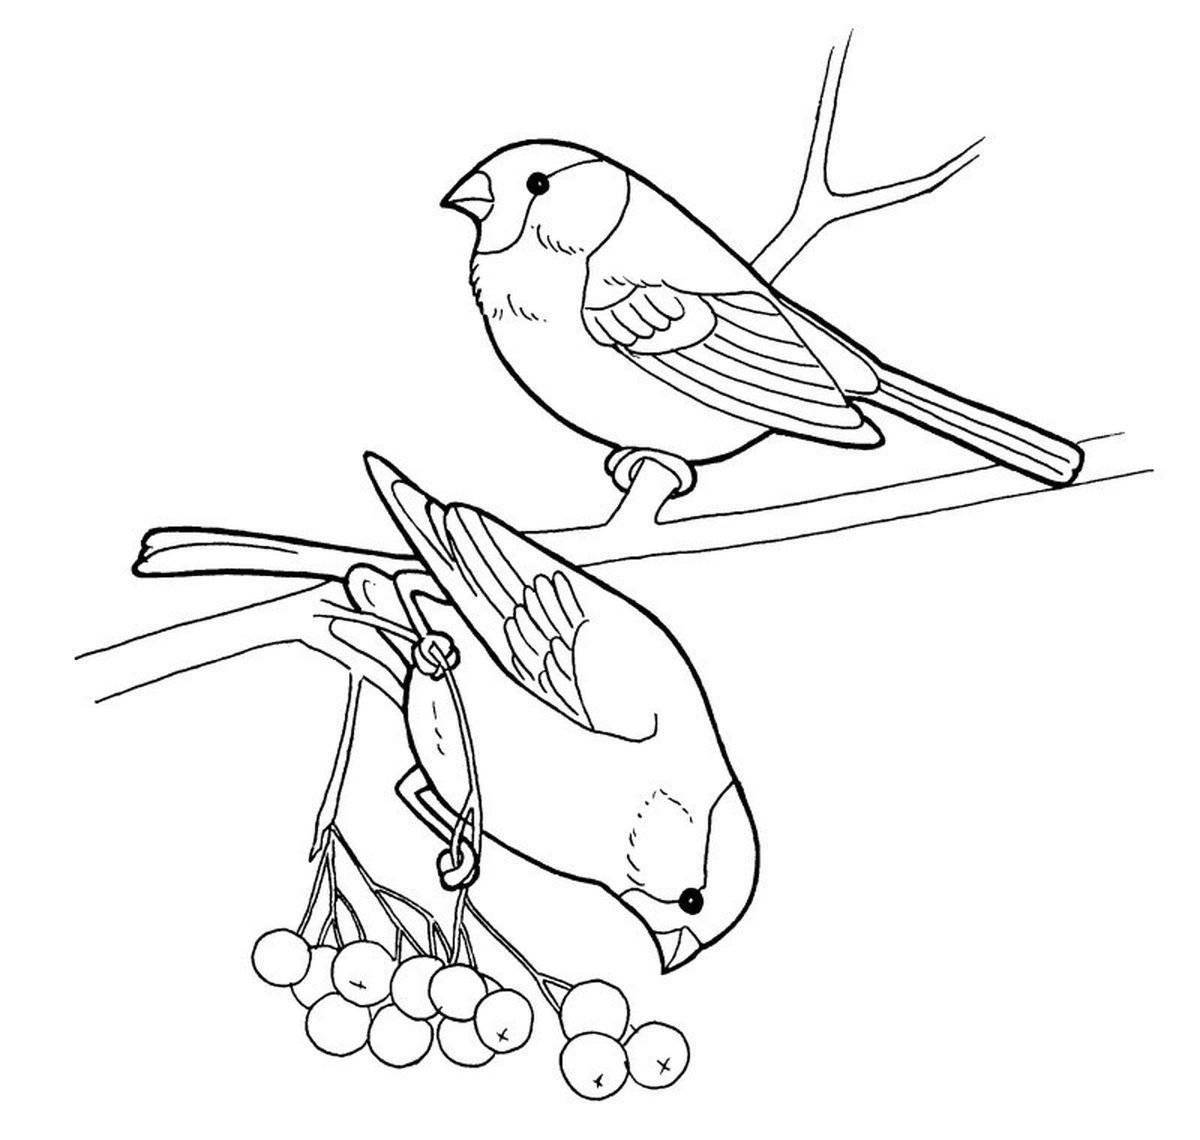 Fantastic drawing of a bullfinch for children